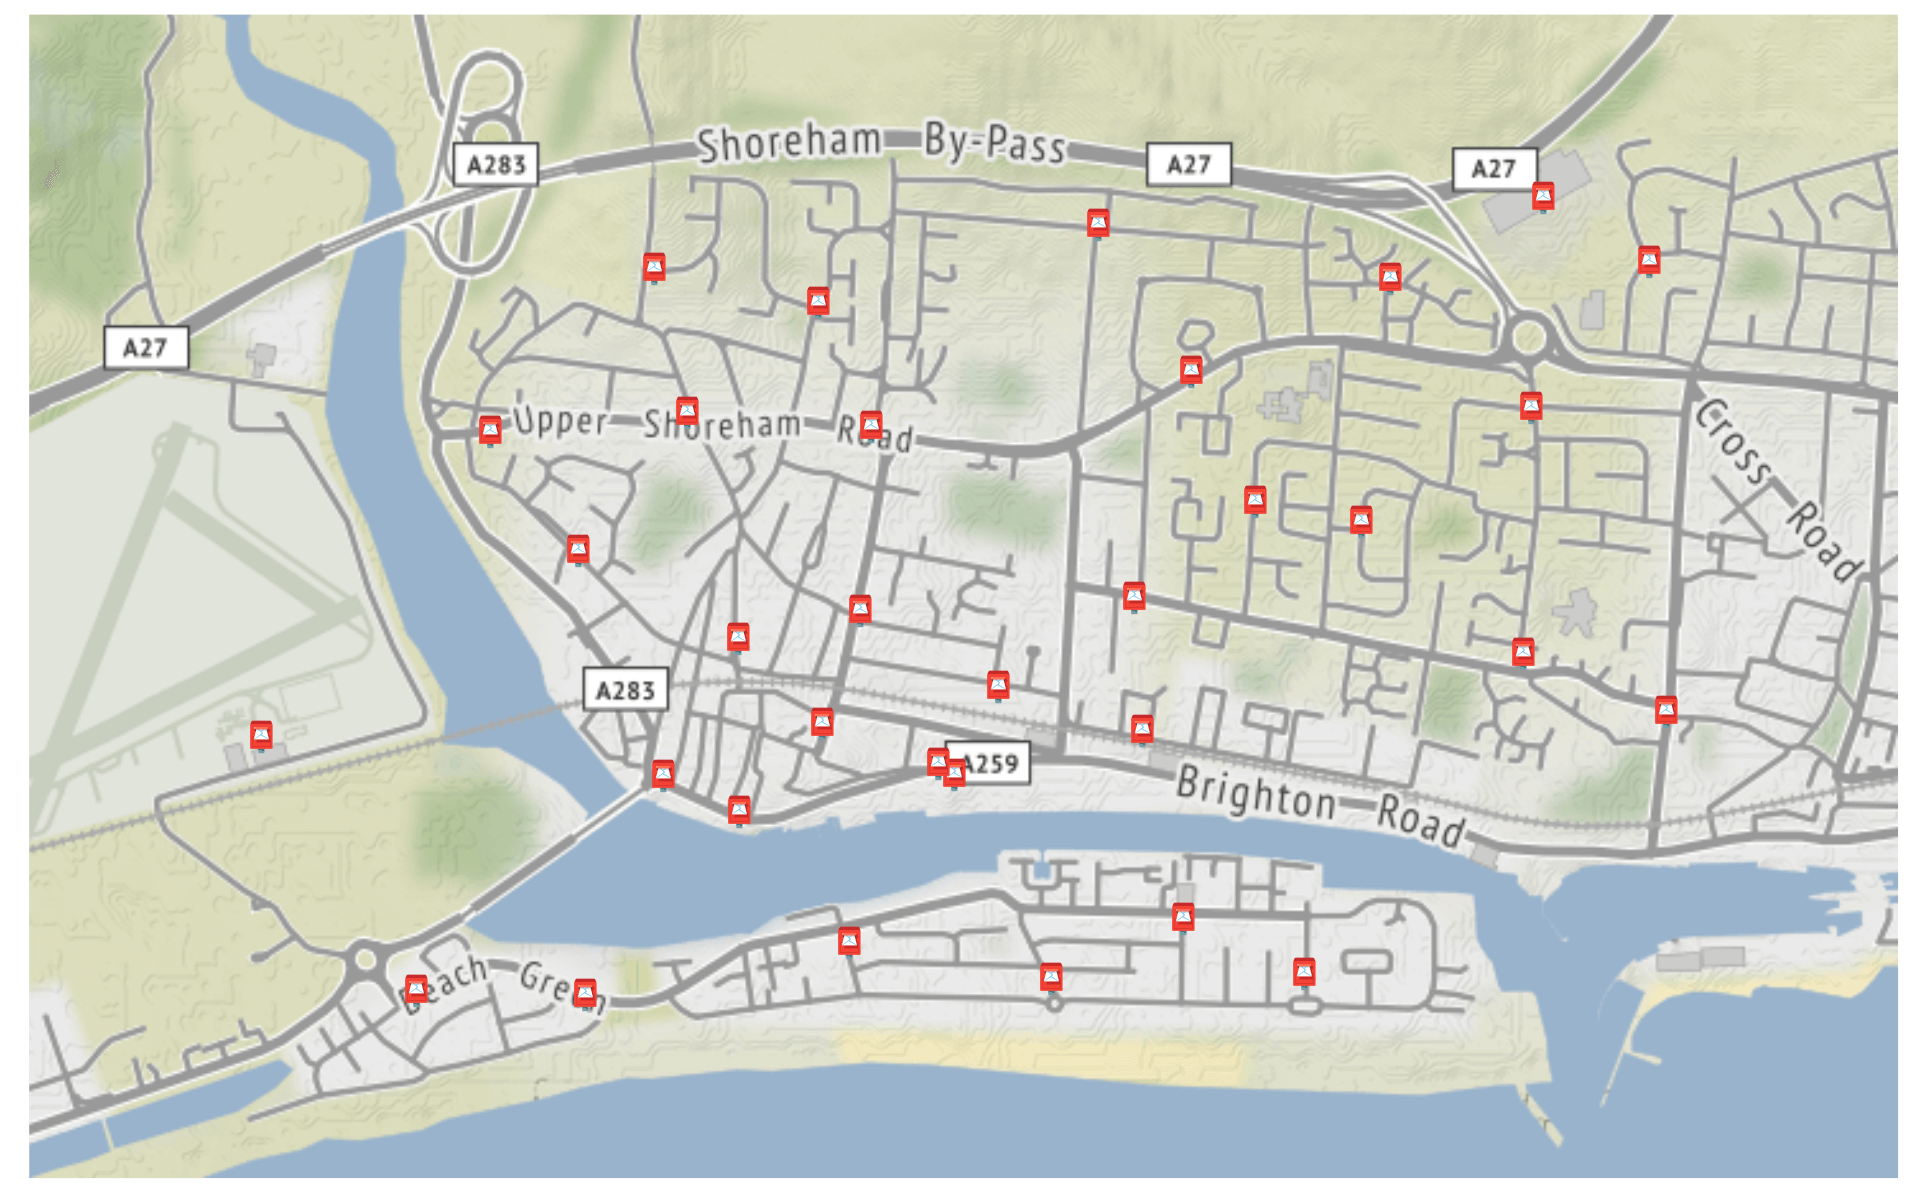 Locations of postboxes around Shoreham-by-Sea.